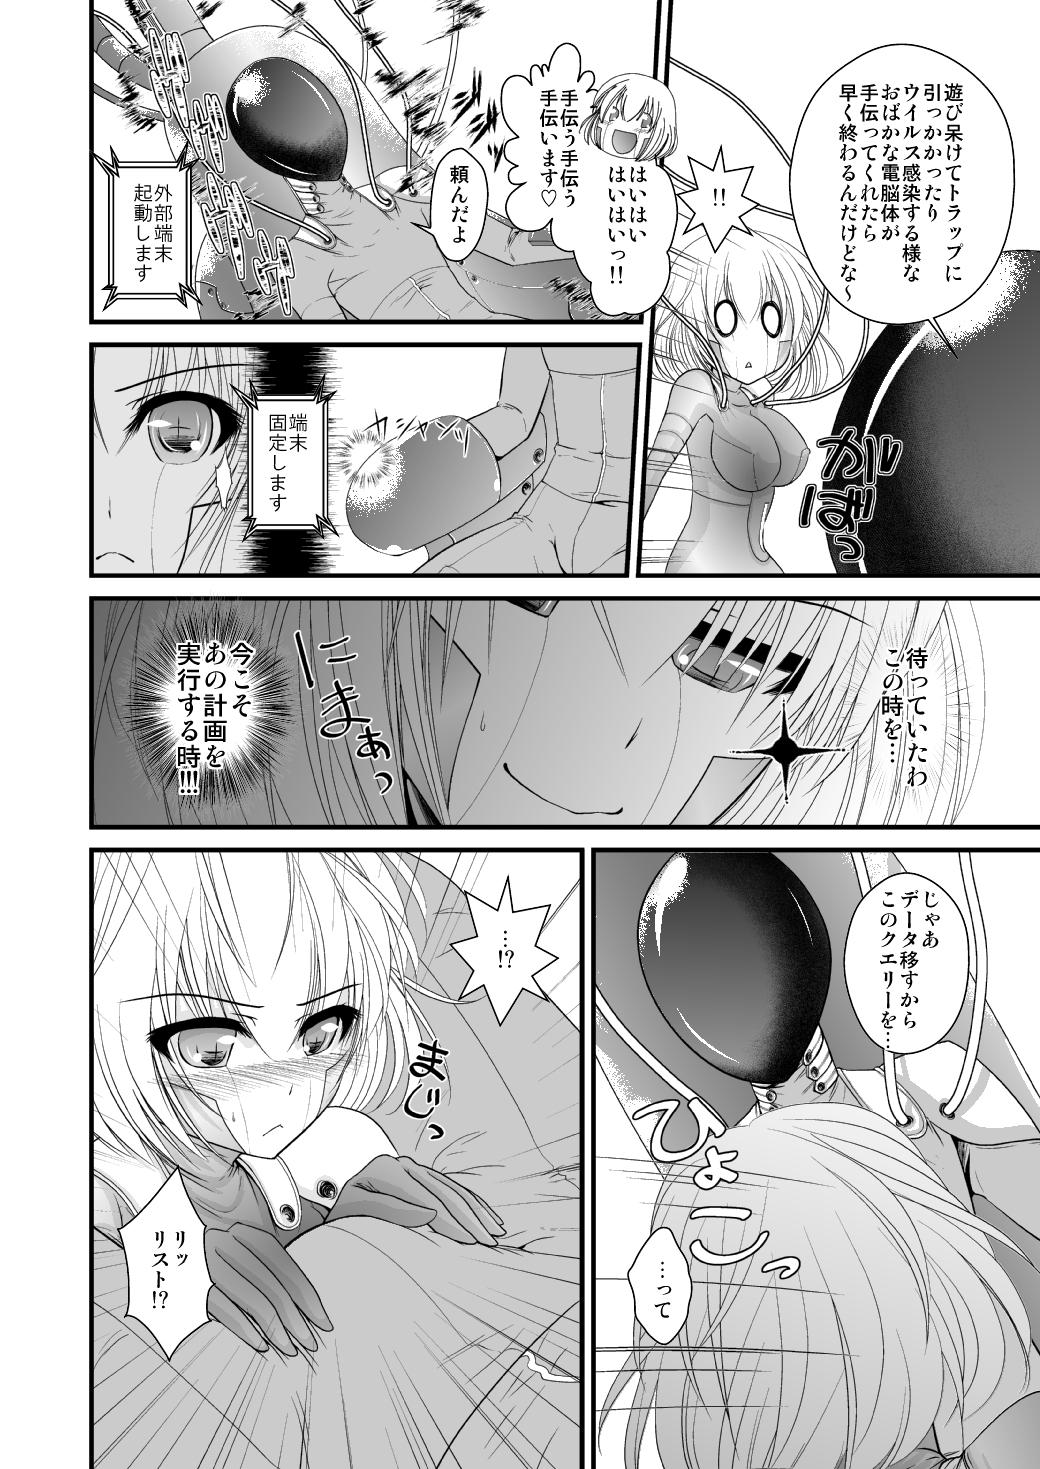 Gostoso アルゴリズム Creampies - Page 8